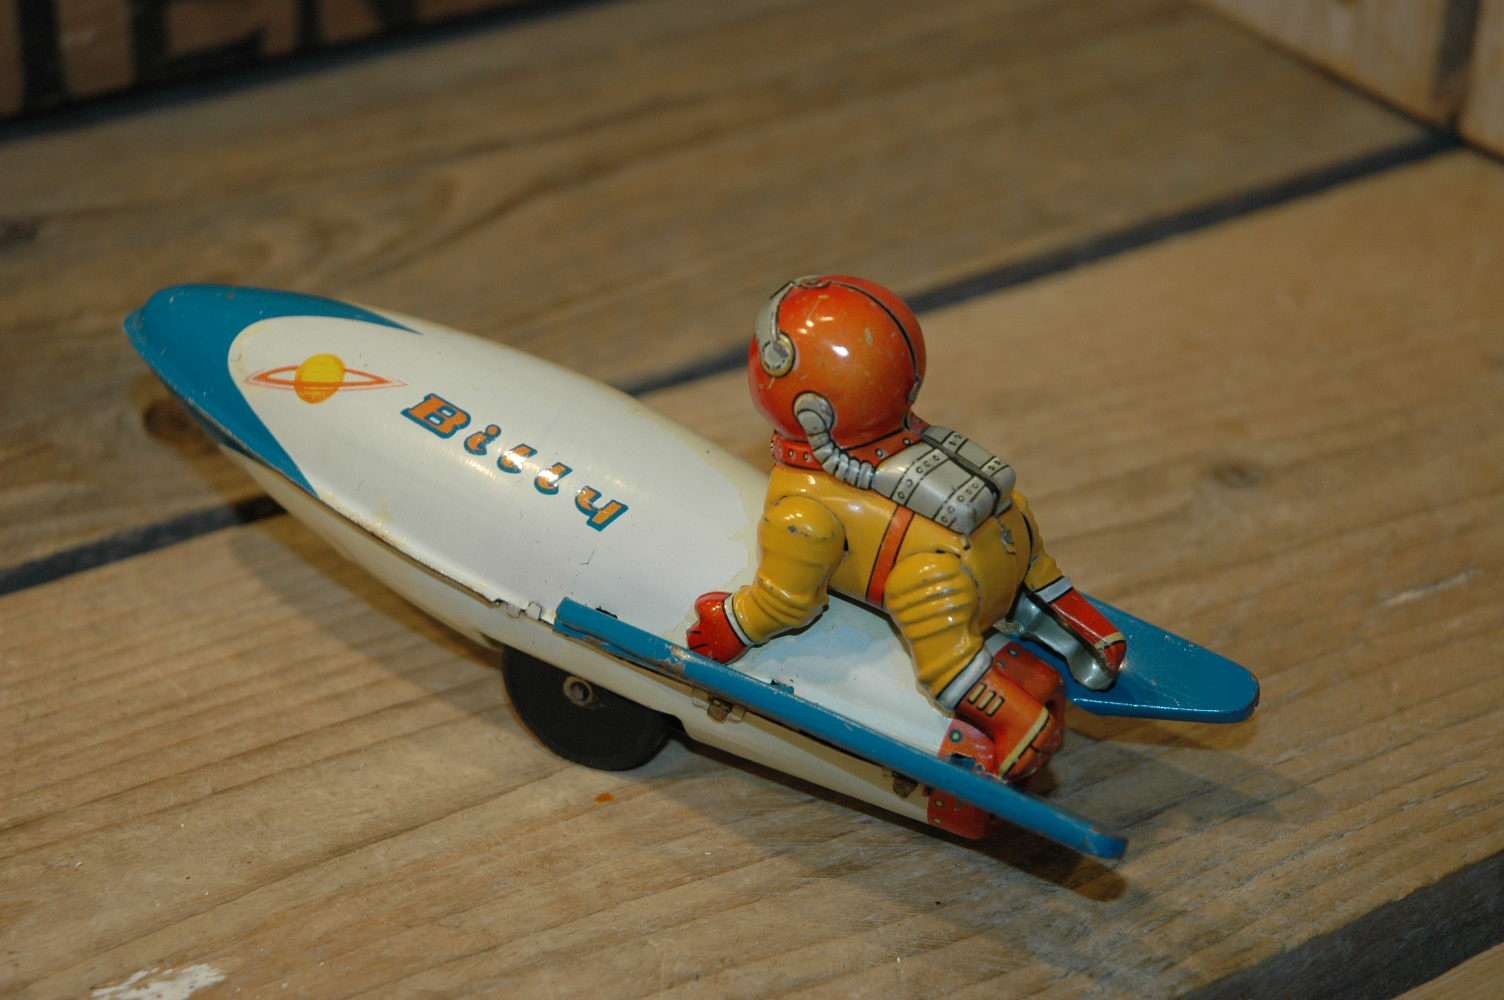 Modern Toys - Billy the space traveler